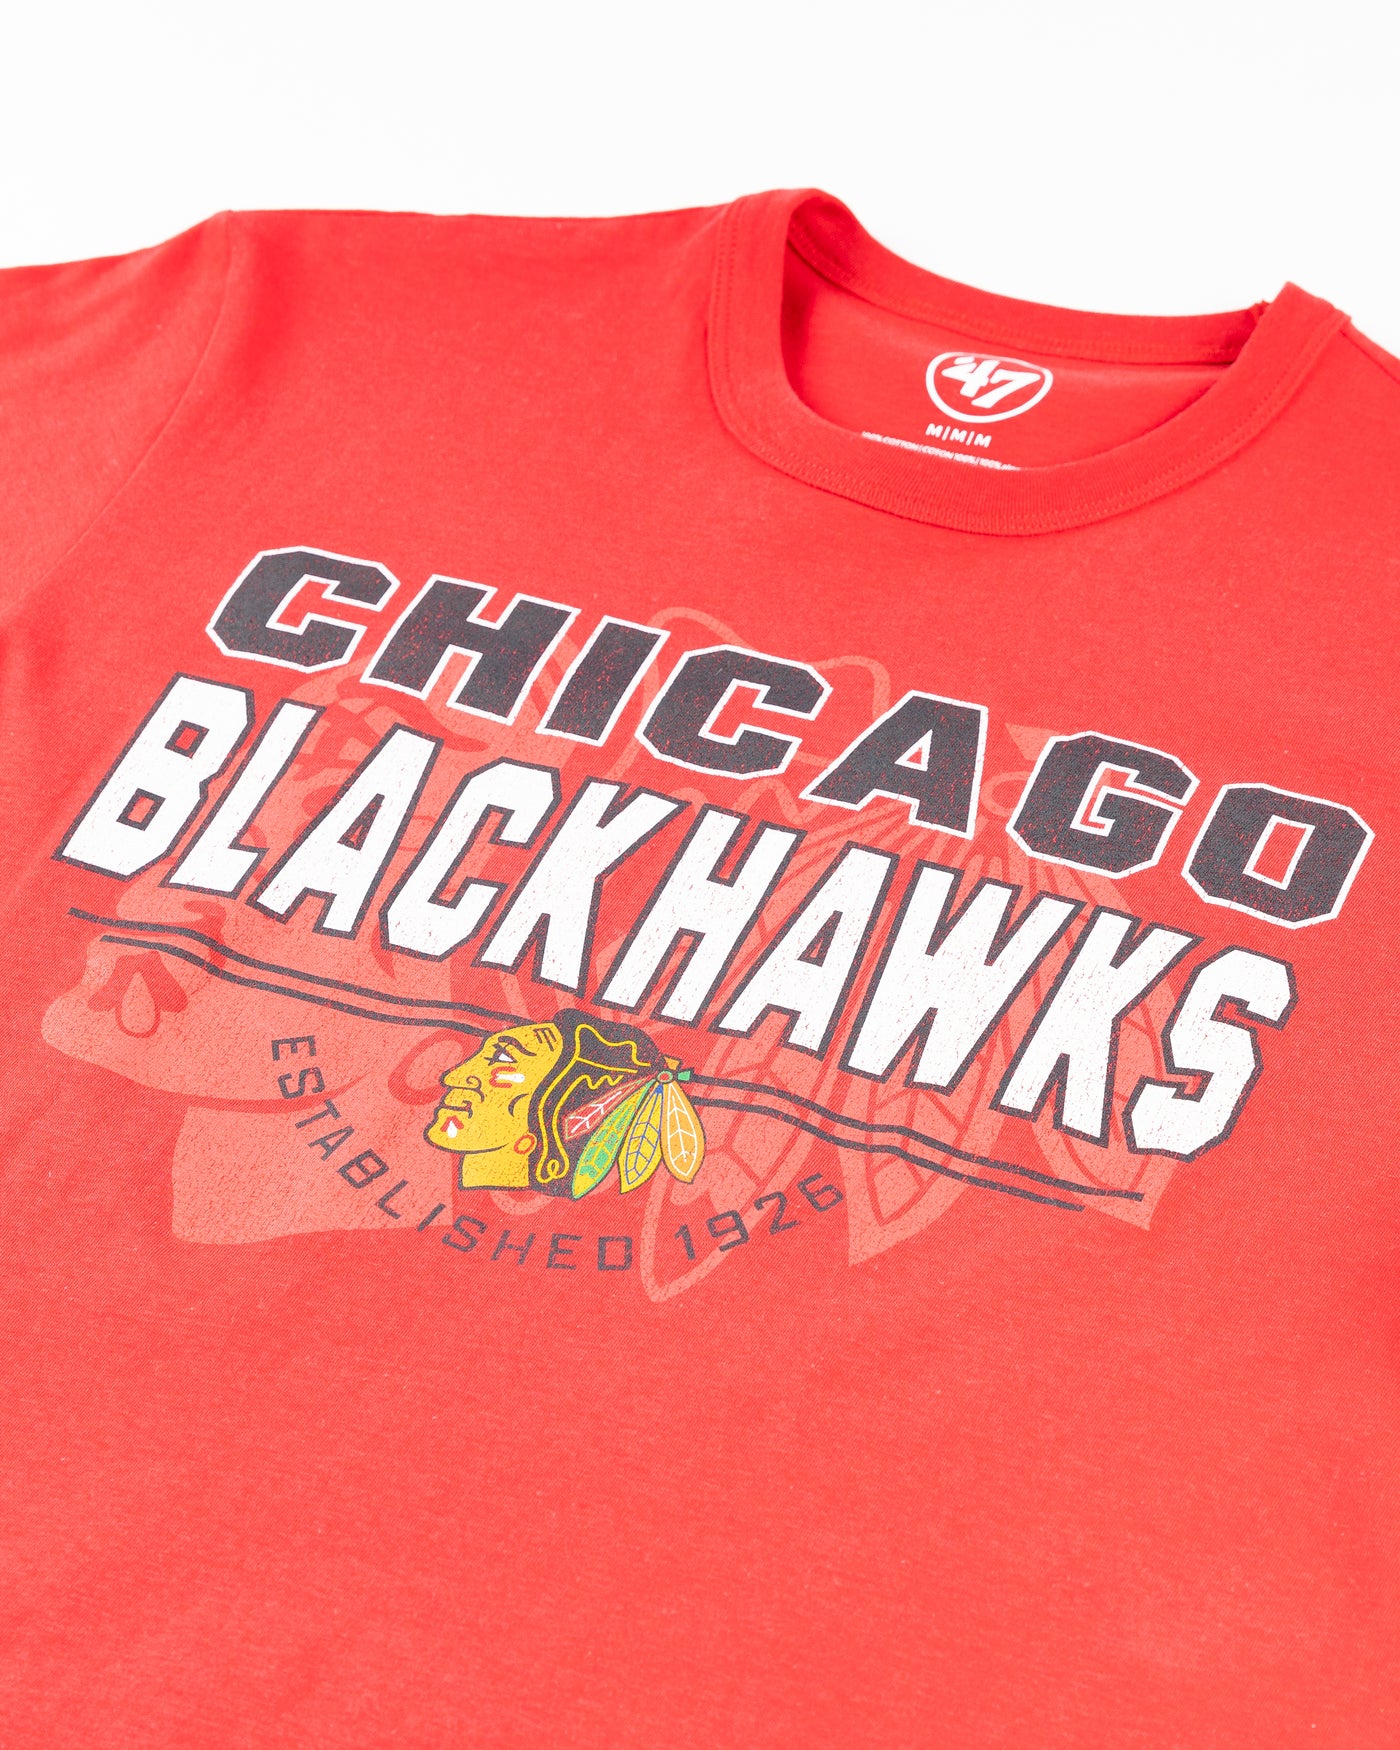 '47 brand red short sleeve tee with Chicago Blackhawks graphic across front - detail lay flat